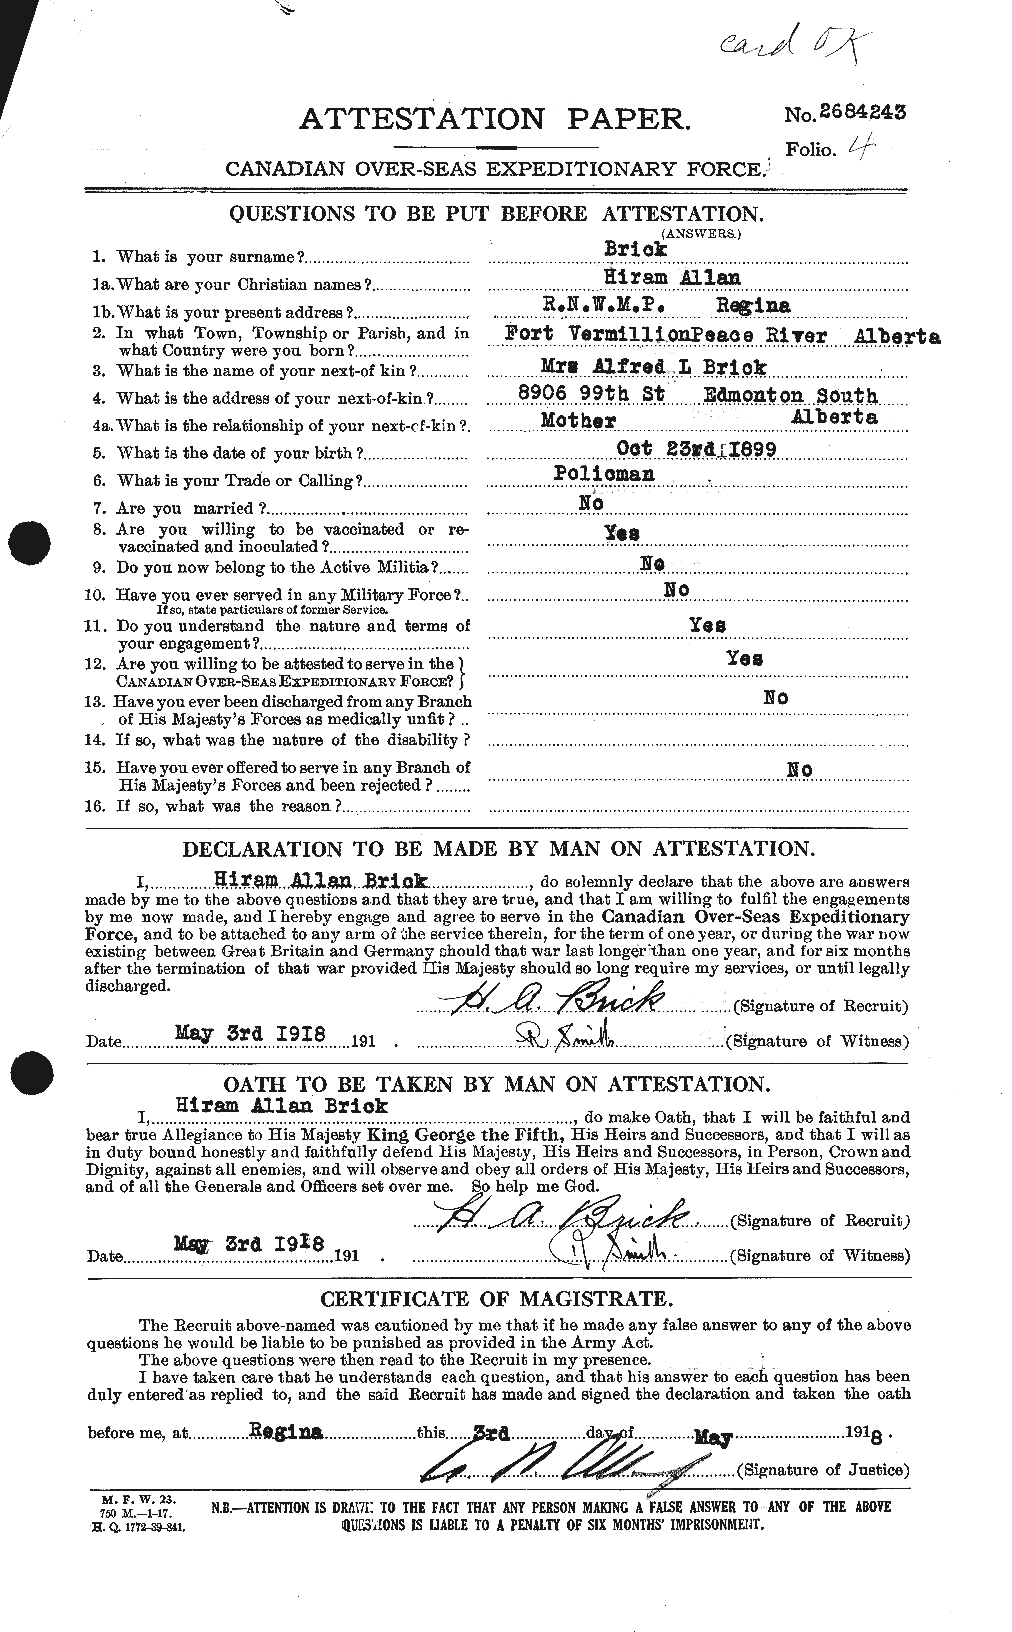 Personnel Records of the First World War - CEF 261175a